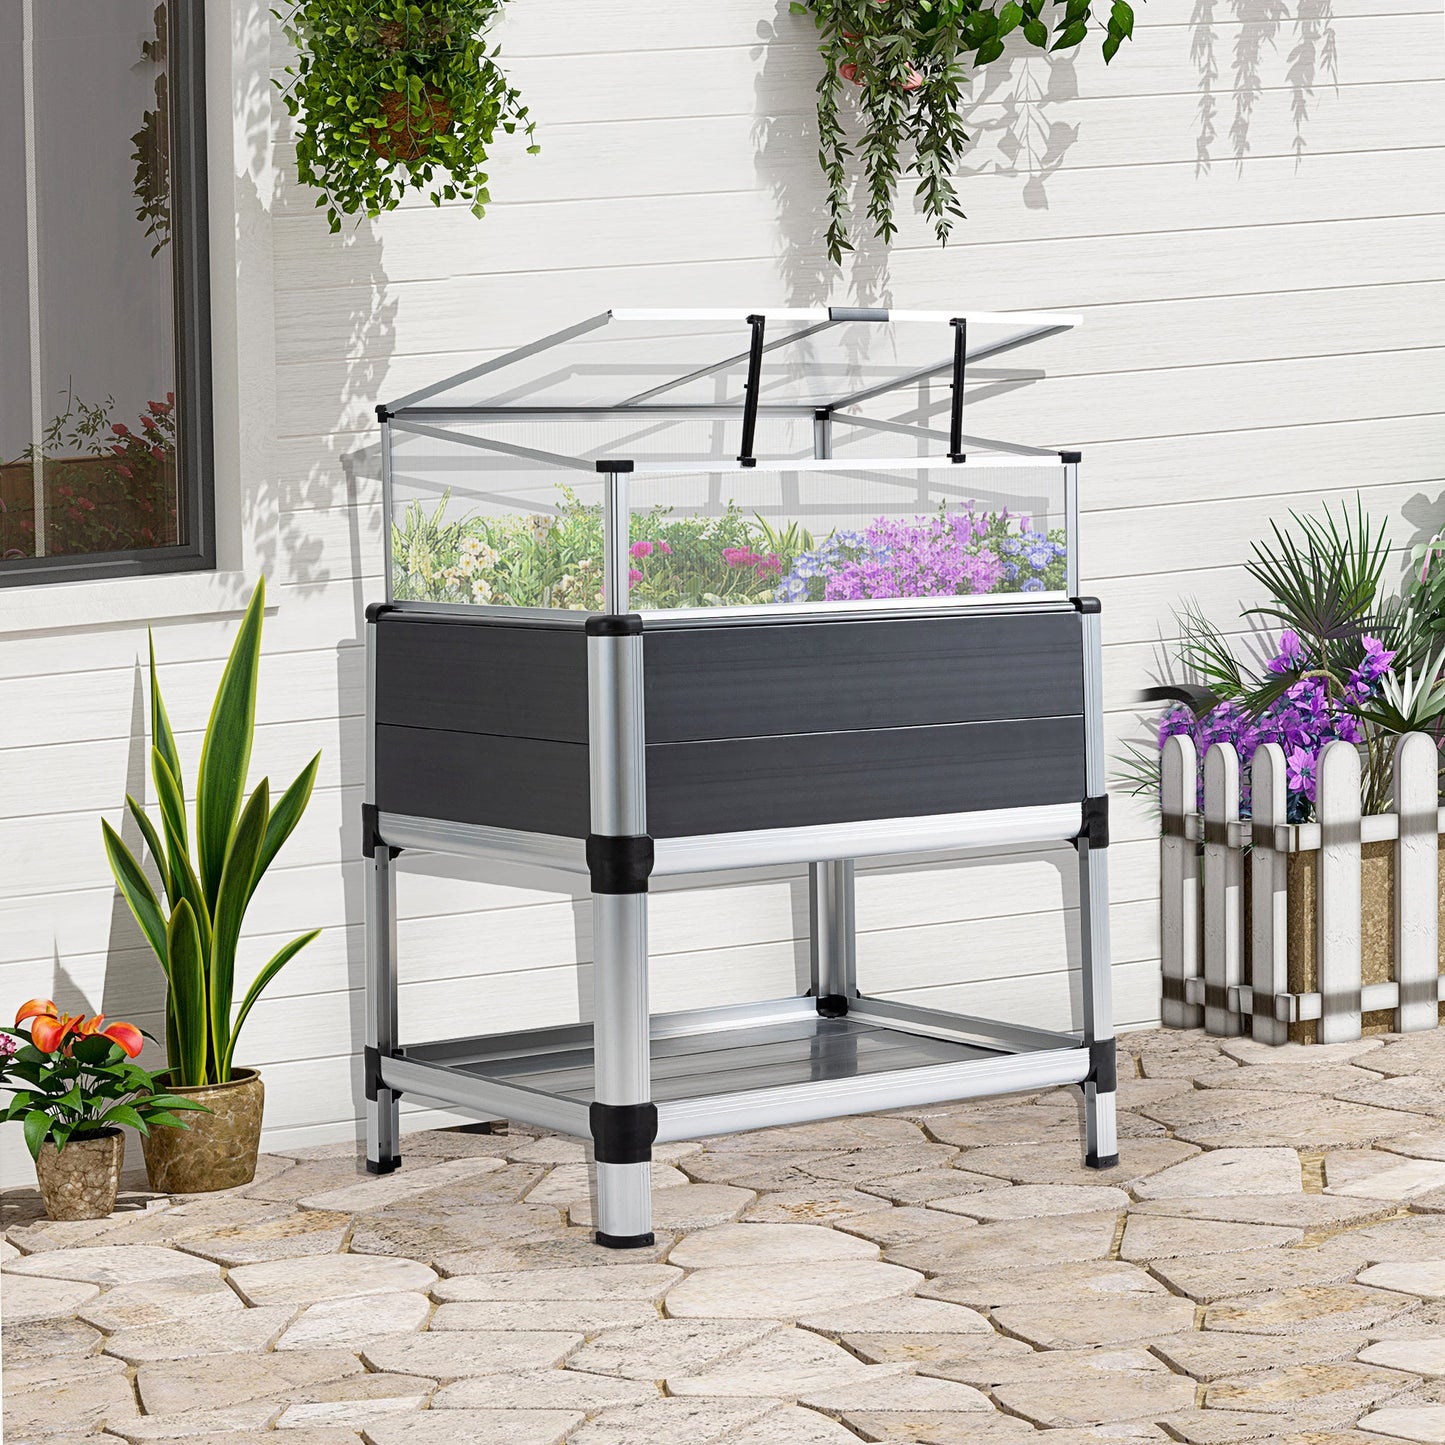 Raised Garden Bed with Cold Frame Greenhouse and Storage Shelf, Aluminum &; PVC Elevated Planter Box for Herbs and Vegetables, Use for Patio, Backyard, Balcony at Gallery Canada